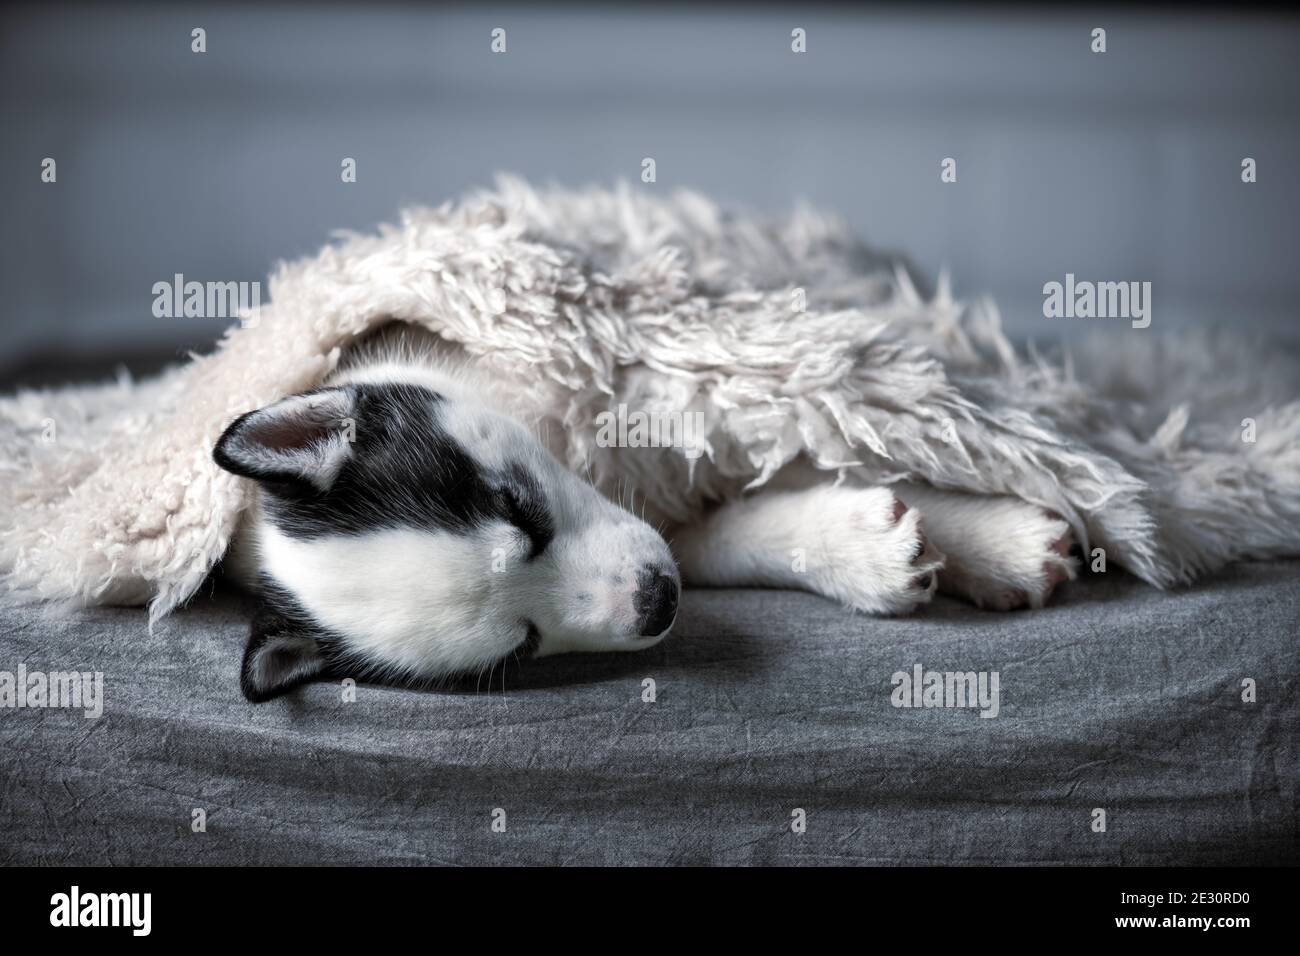 A small white dog puppy breed siberian husky with beautiful blue eyes lays on grey carpet. Dogs and pet photography Stock Photo